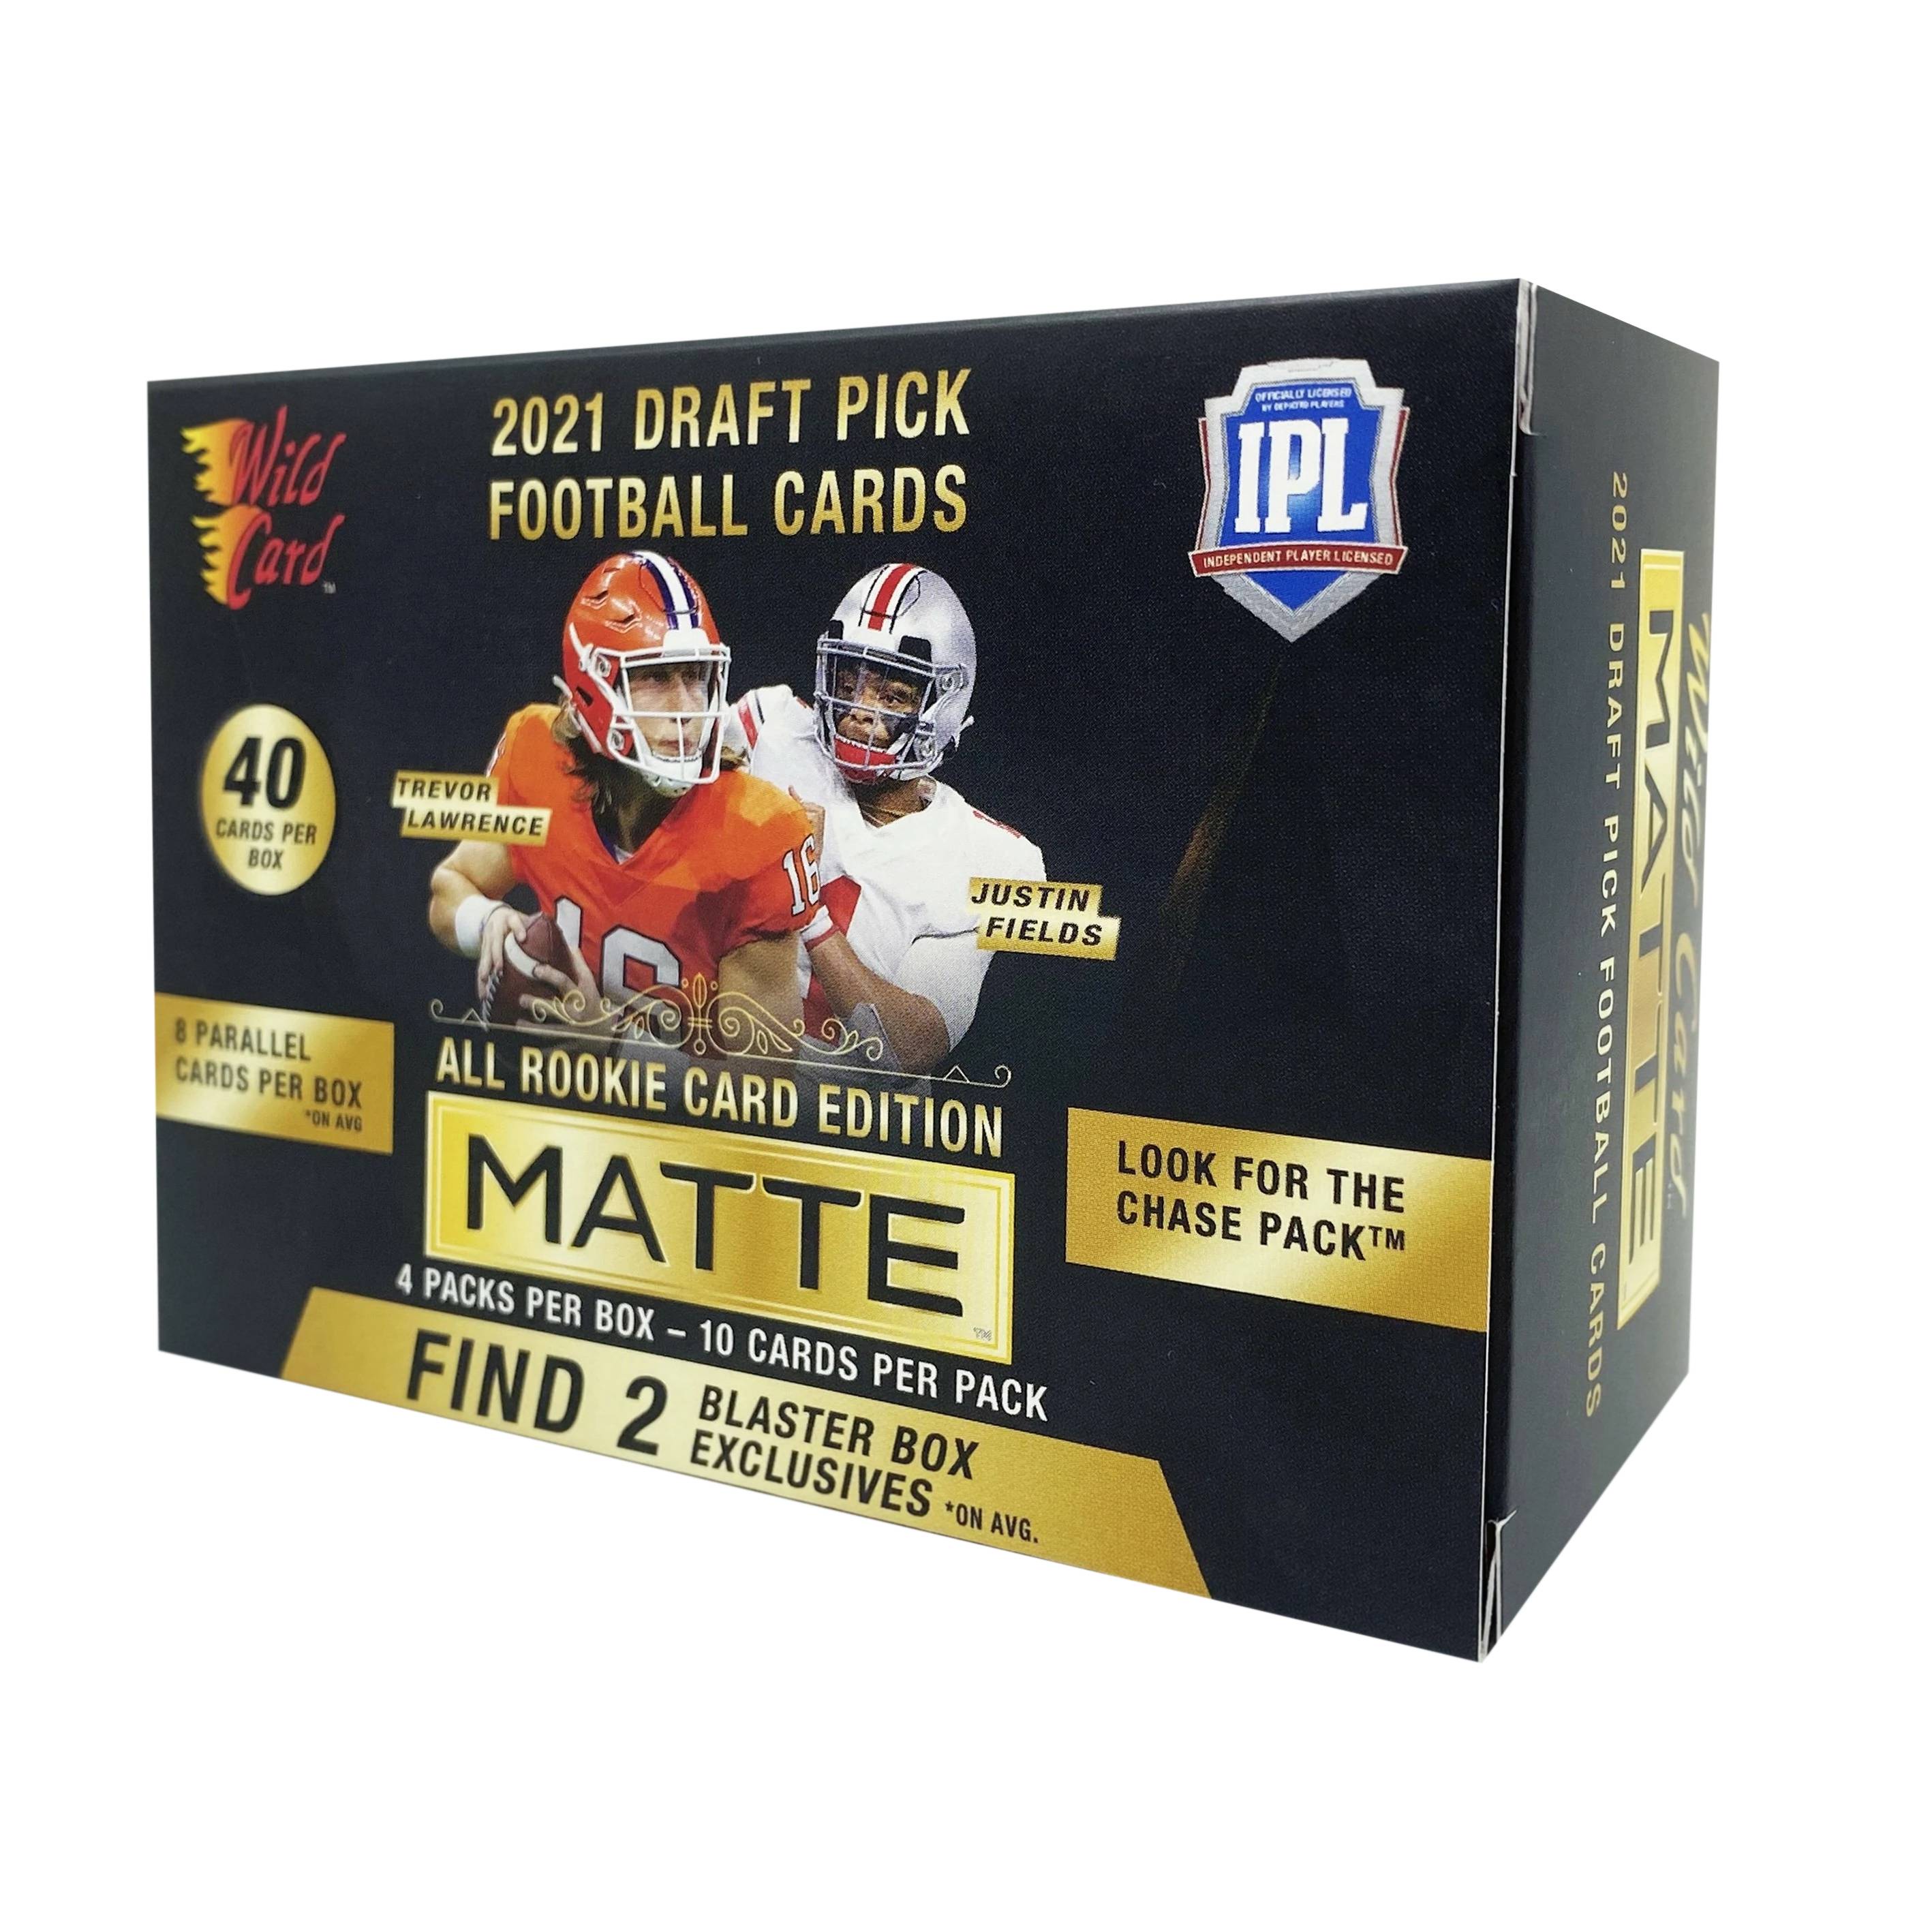 2021 Wild Card Draft Pick All Rookie Card Edition Matte Blaster Box (Look for RED CHASE Packs) - Miraj Trading